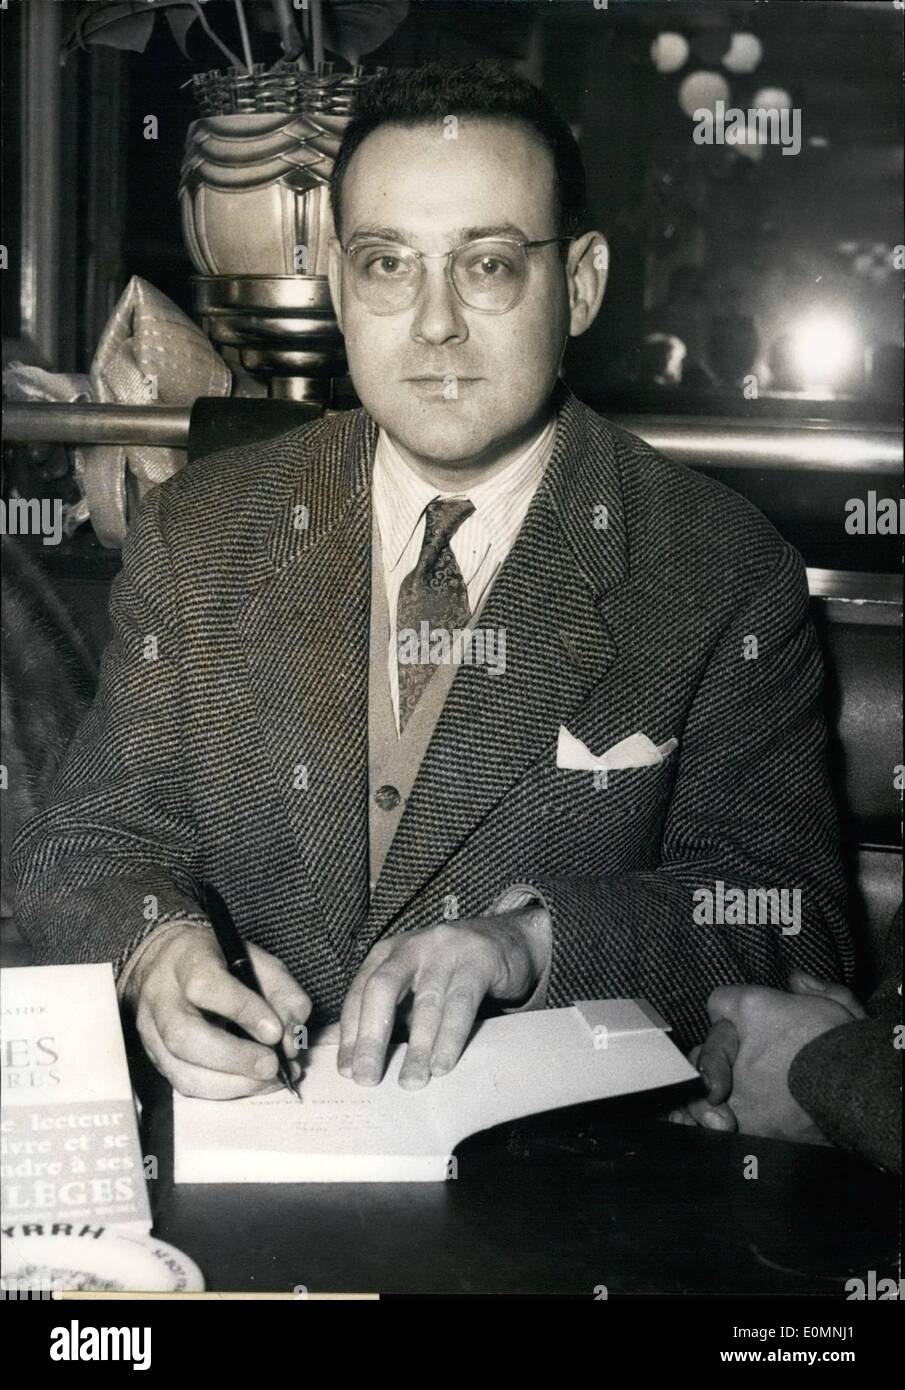 Jan. 01, 1956 - The Guillaume Apollinaire Prize to Robert Sabatier - The Guillaume Apollinaire Prize, which is awarded every year to a poetry work of modern inspiration went this year to Robert Sabatier for his poems: Les Fetes Solaires (Solar Festivities). OPS: R. Sabatier signing his book Stock Photo